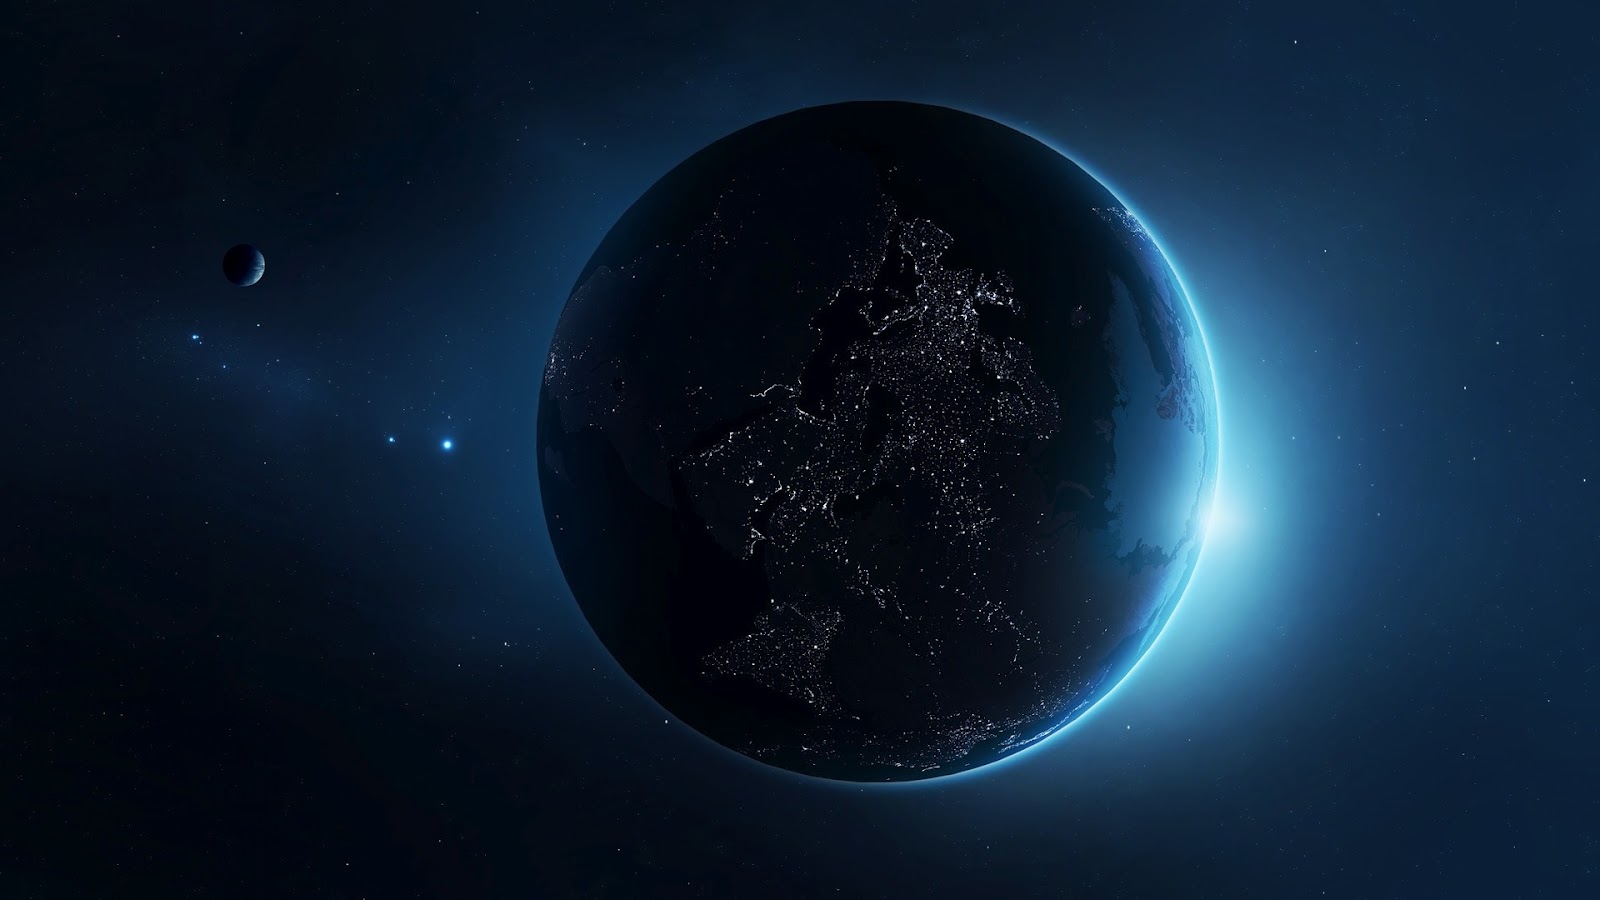 Earth at Night HD Wallpaper Home of Wallpapers Free download hd